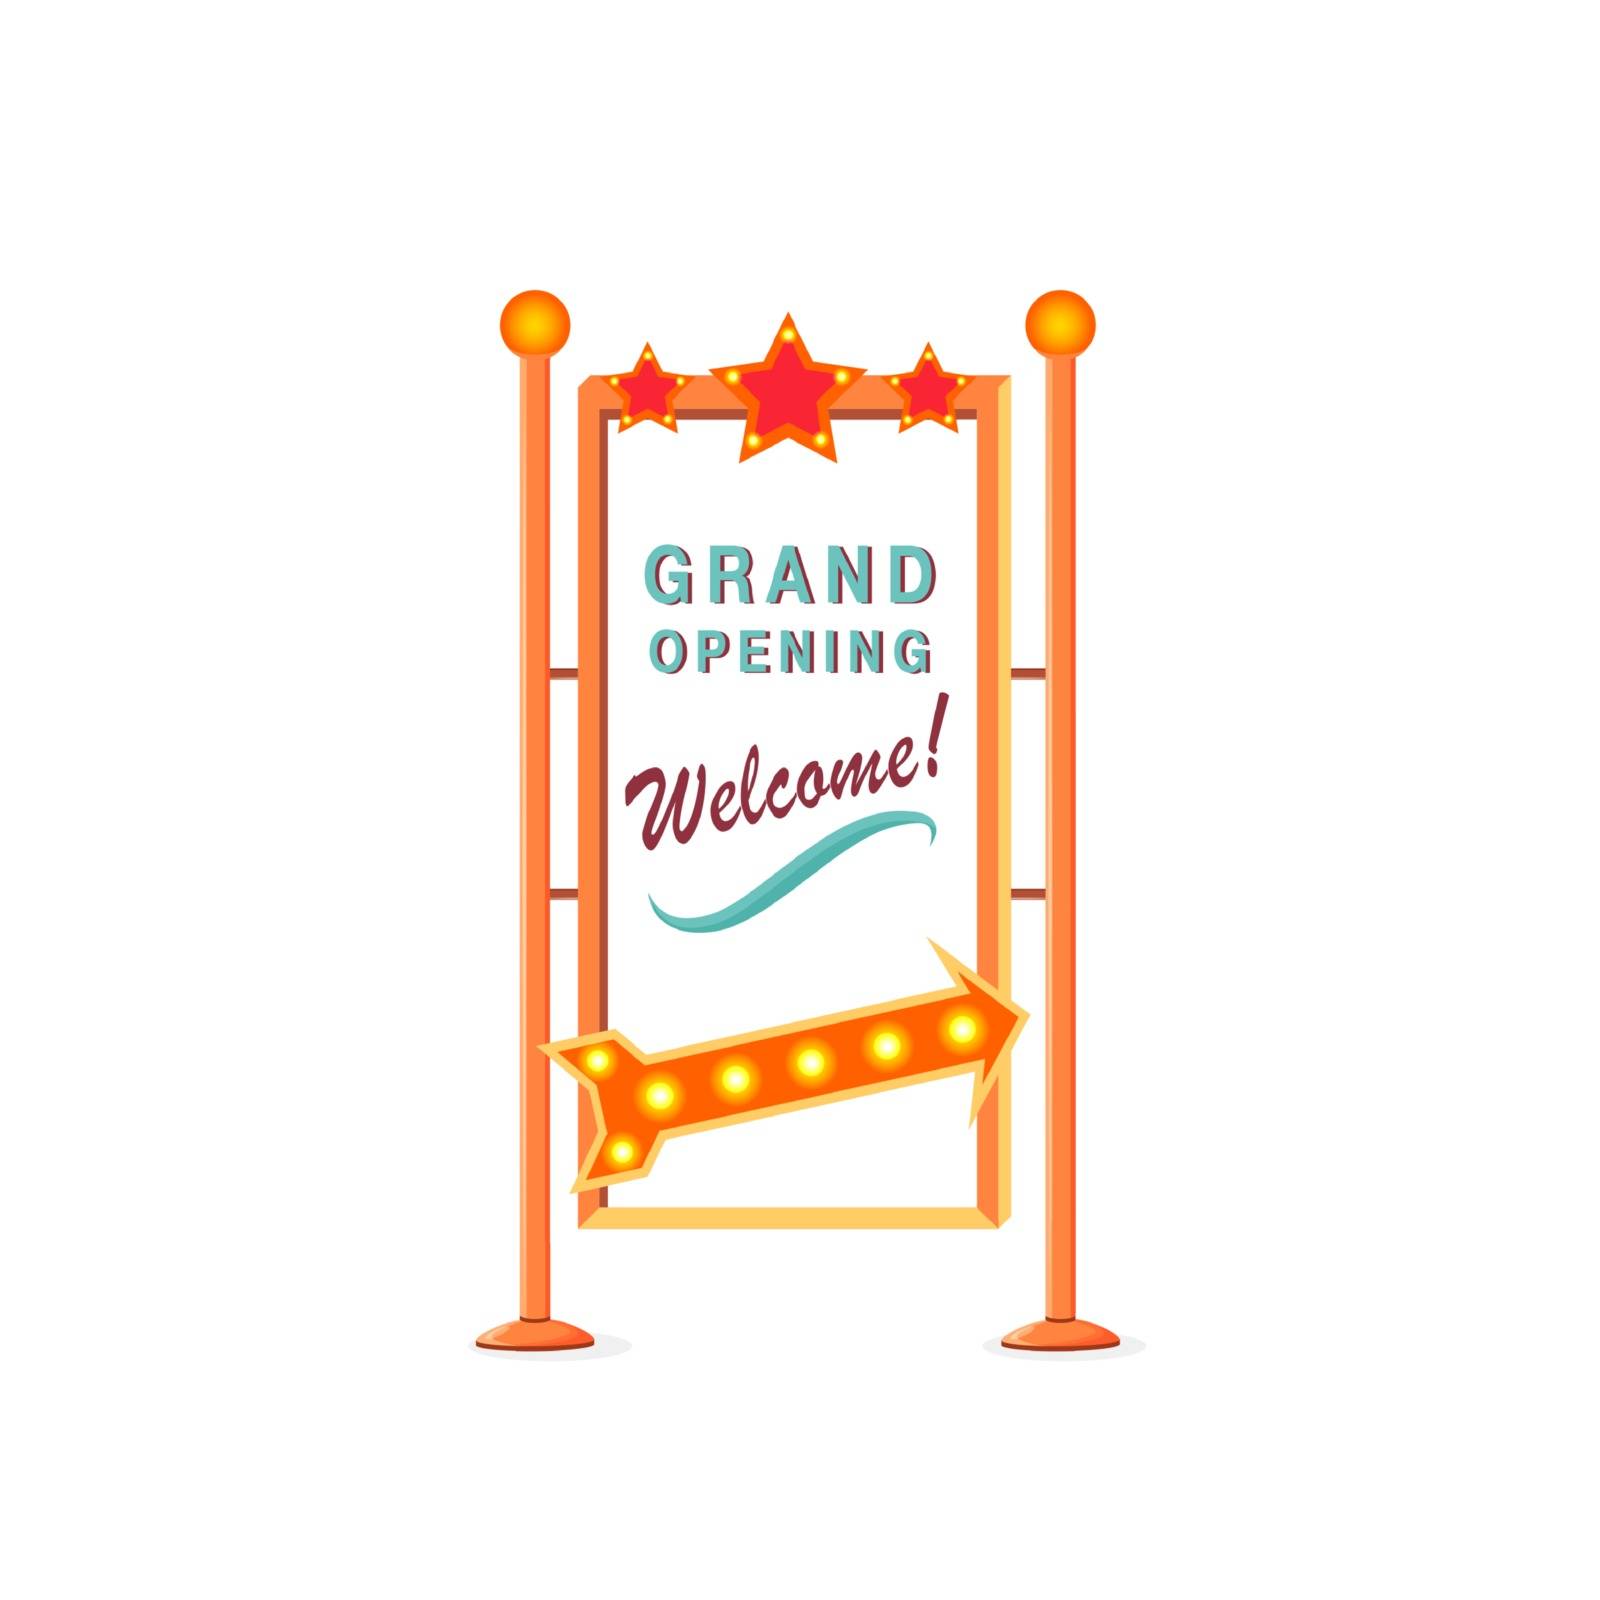 Grand opening vintage vector advert board sign illustration. Commercial billboard mockup design with copy space. Stand with lighbulbs isolated object on white background. Ceremony announcement banner